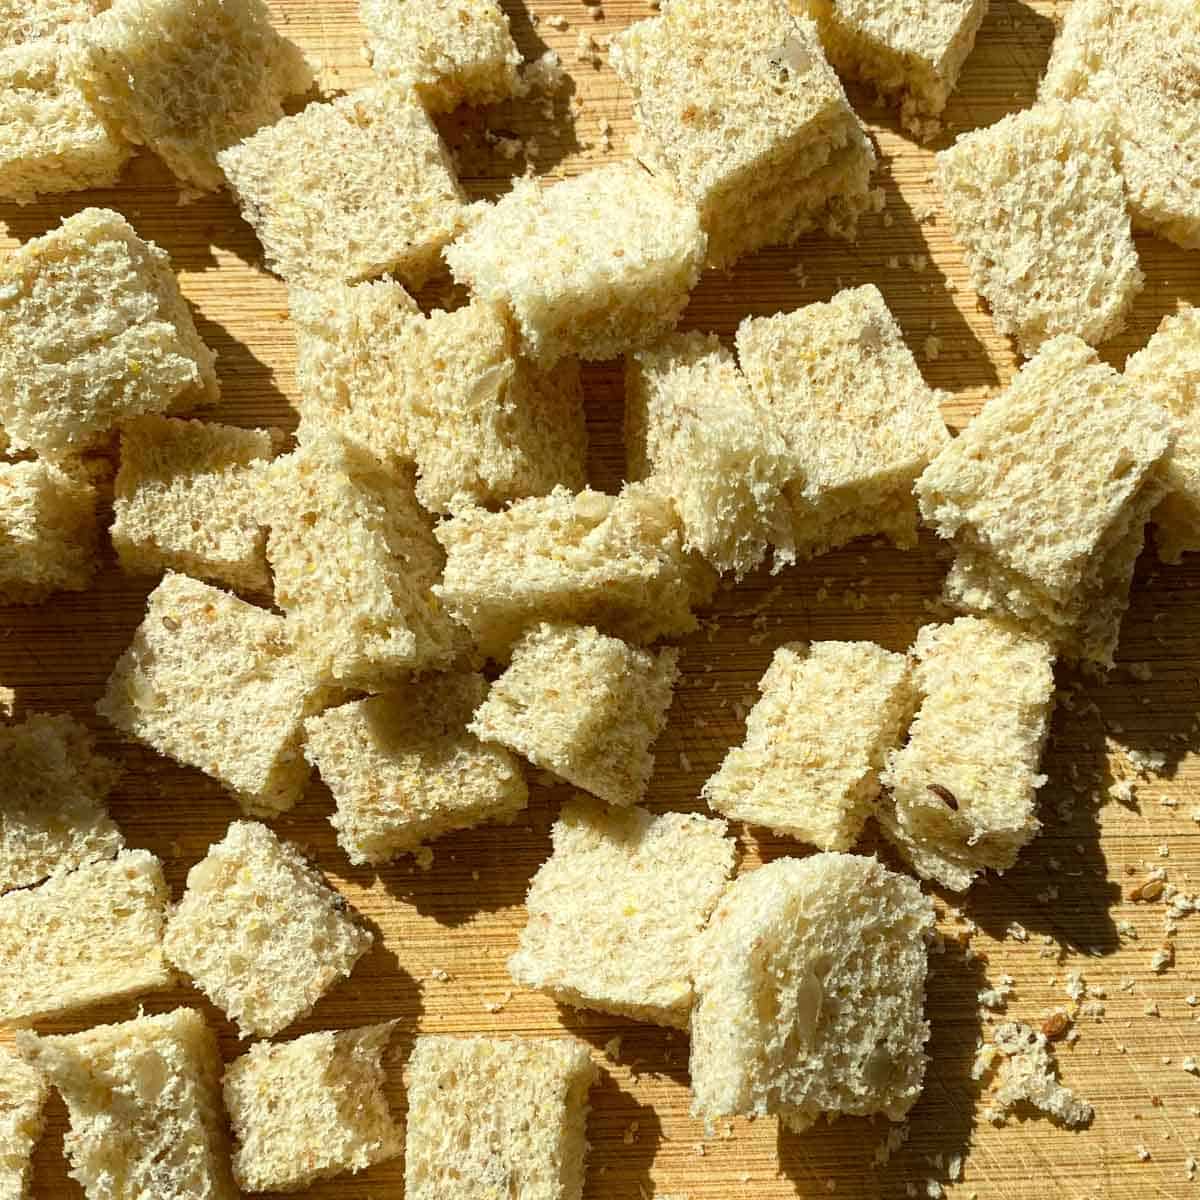 Cubed bread ready to be made into croutons